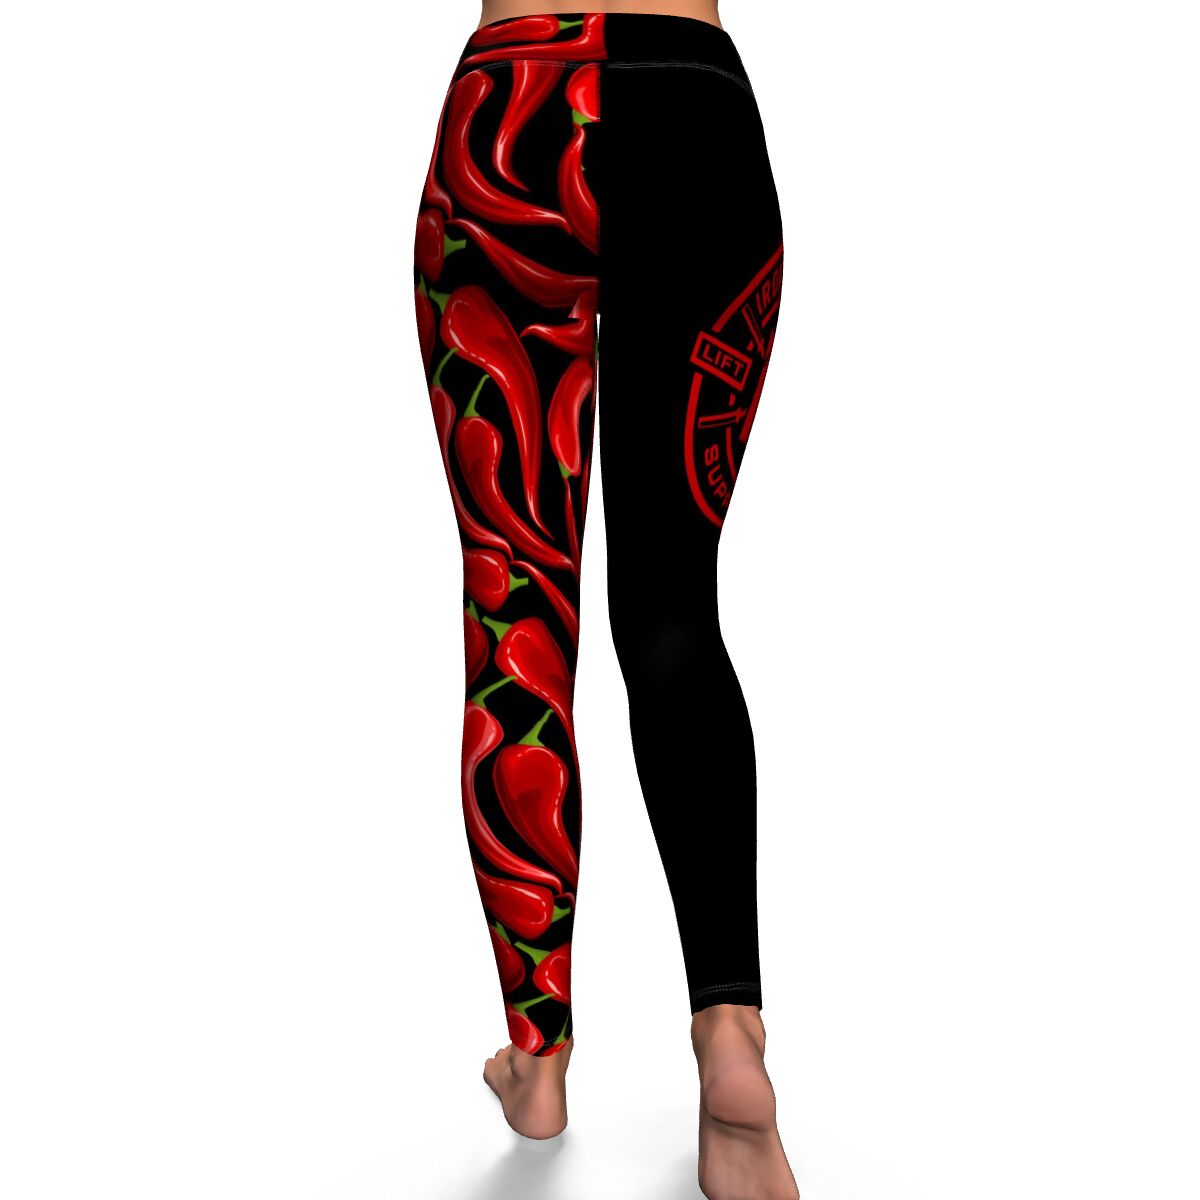 Women's Hot Red Spicy Chili Peppers High-waisted Yoga Leggings Back